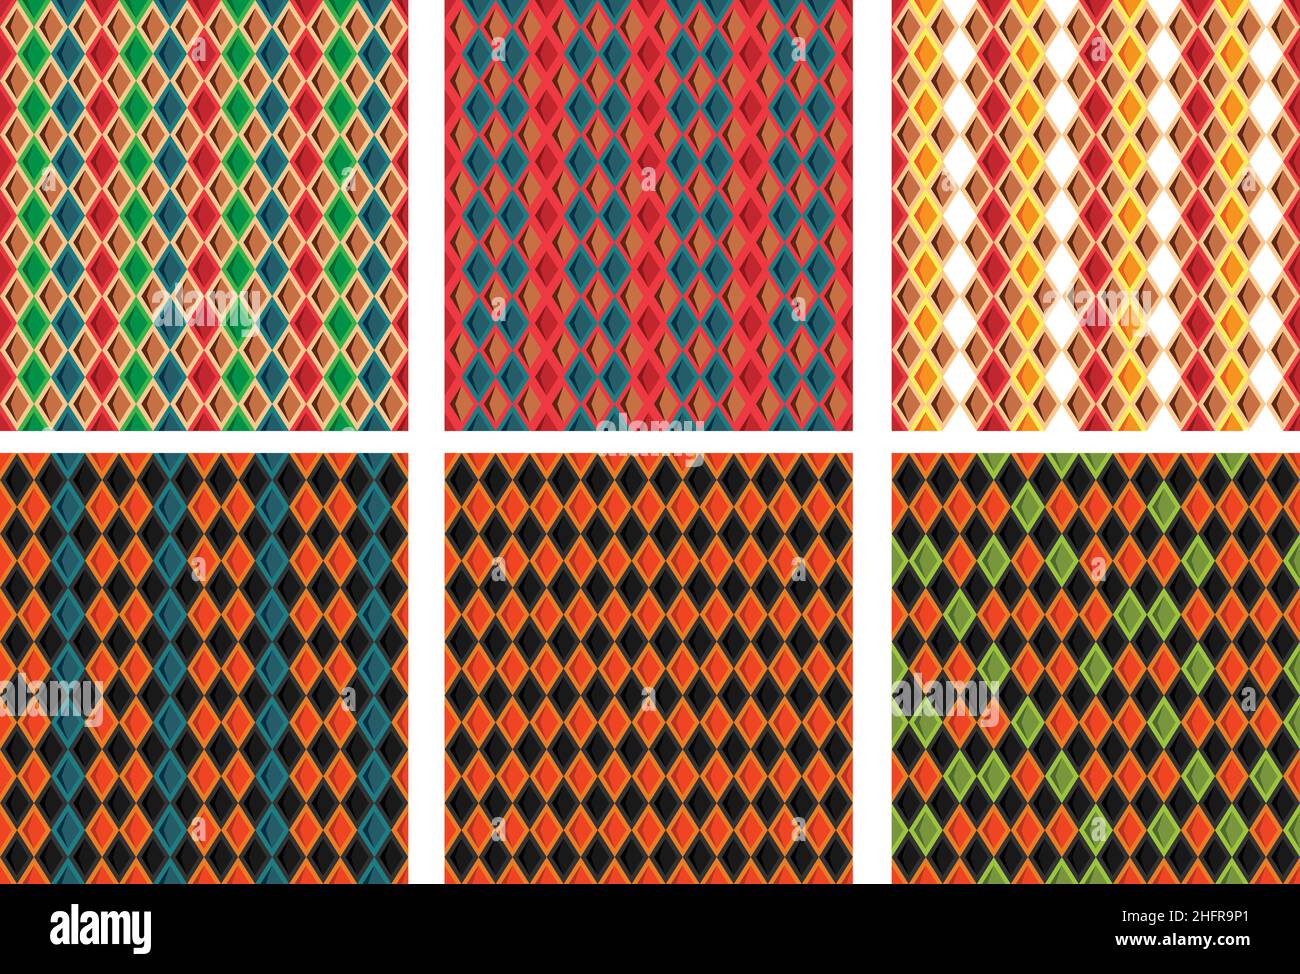 Geometric Abstract Diamond Shape Seamless Repetitive Multicolor and colorful patterns texture Stock Vector